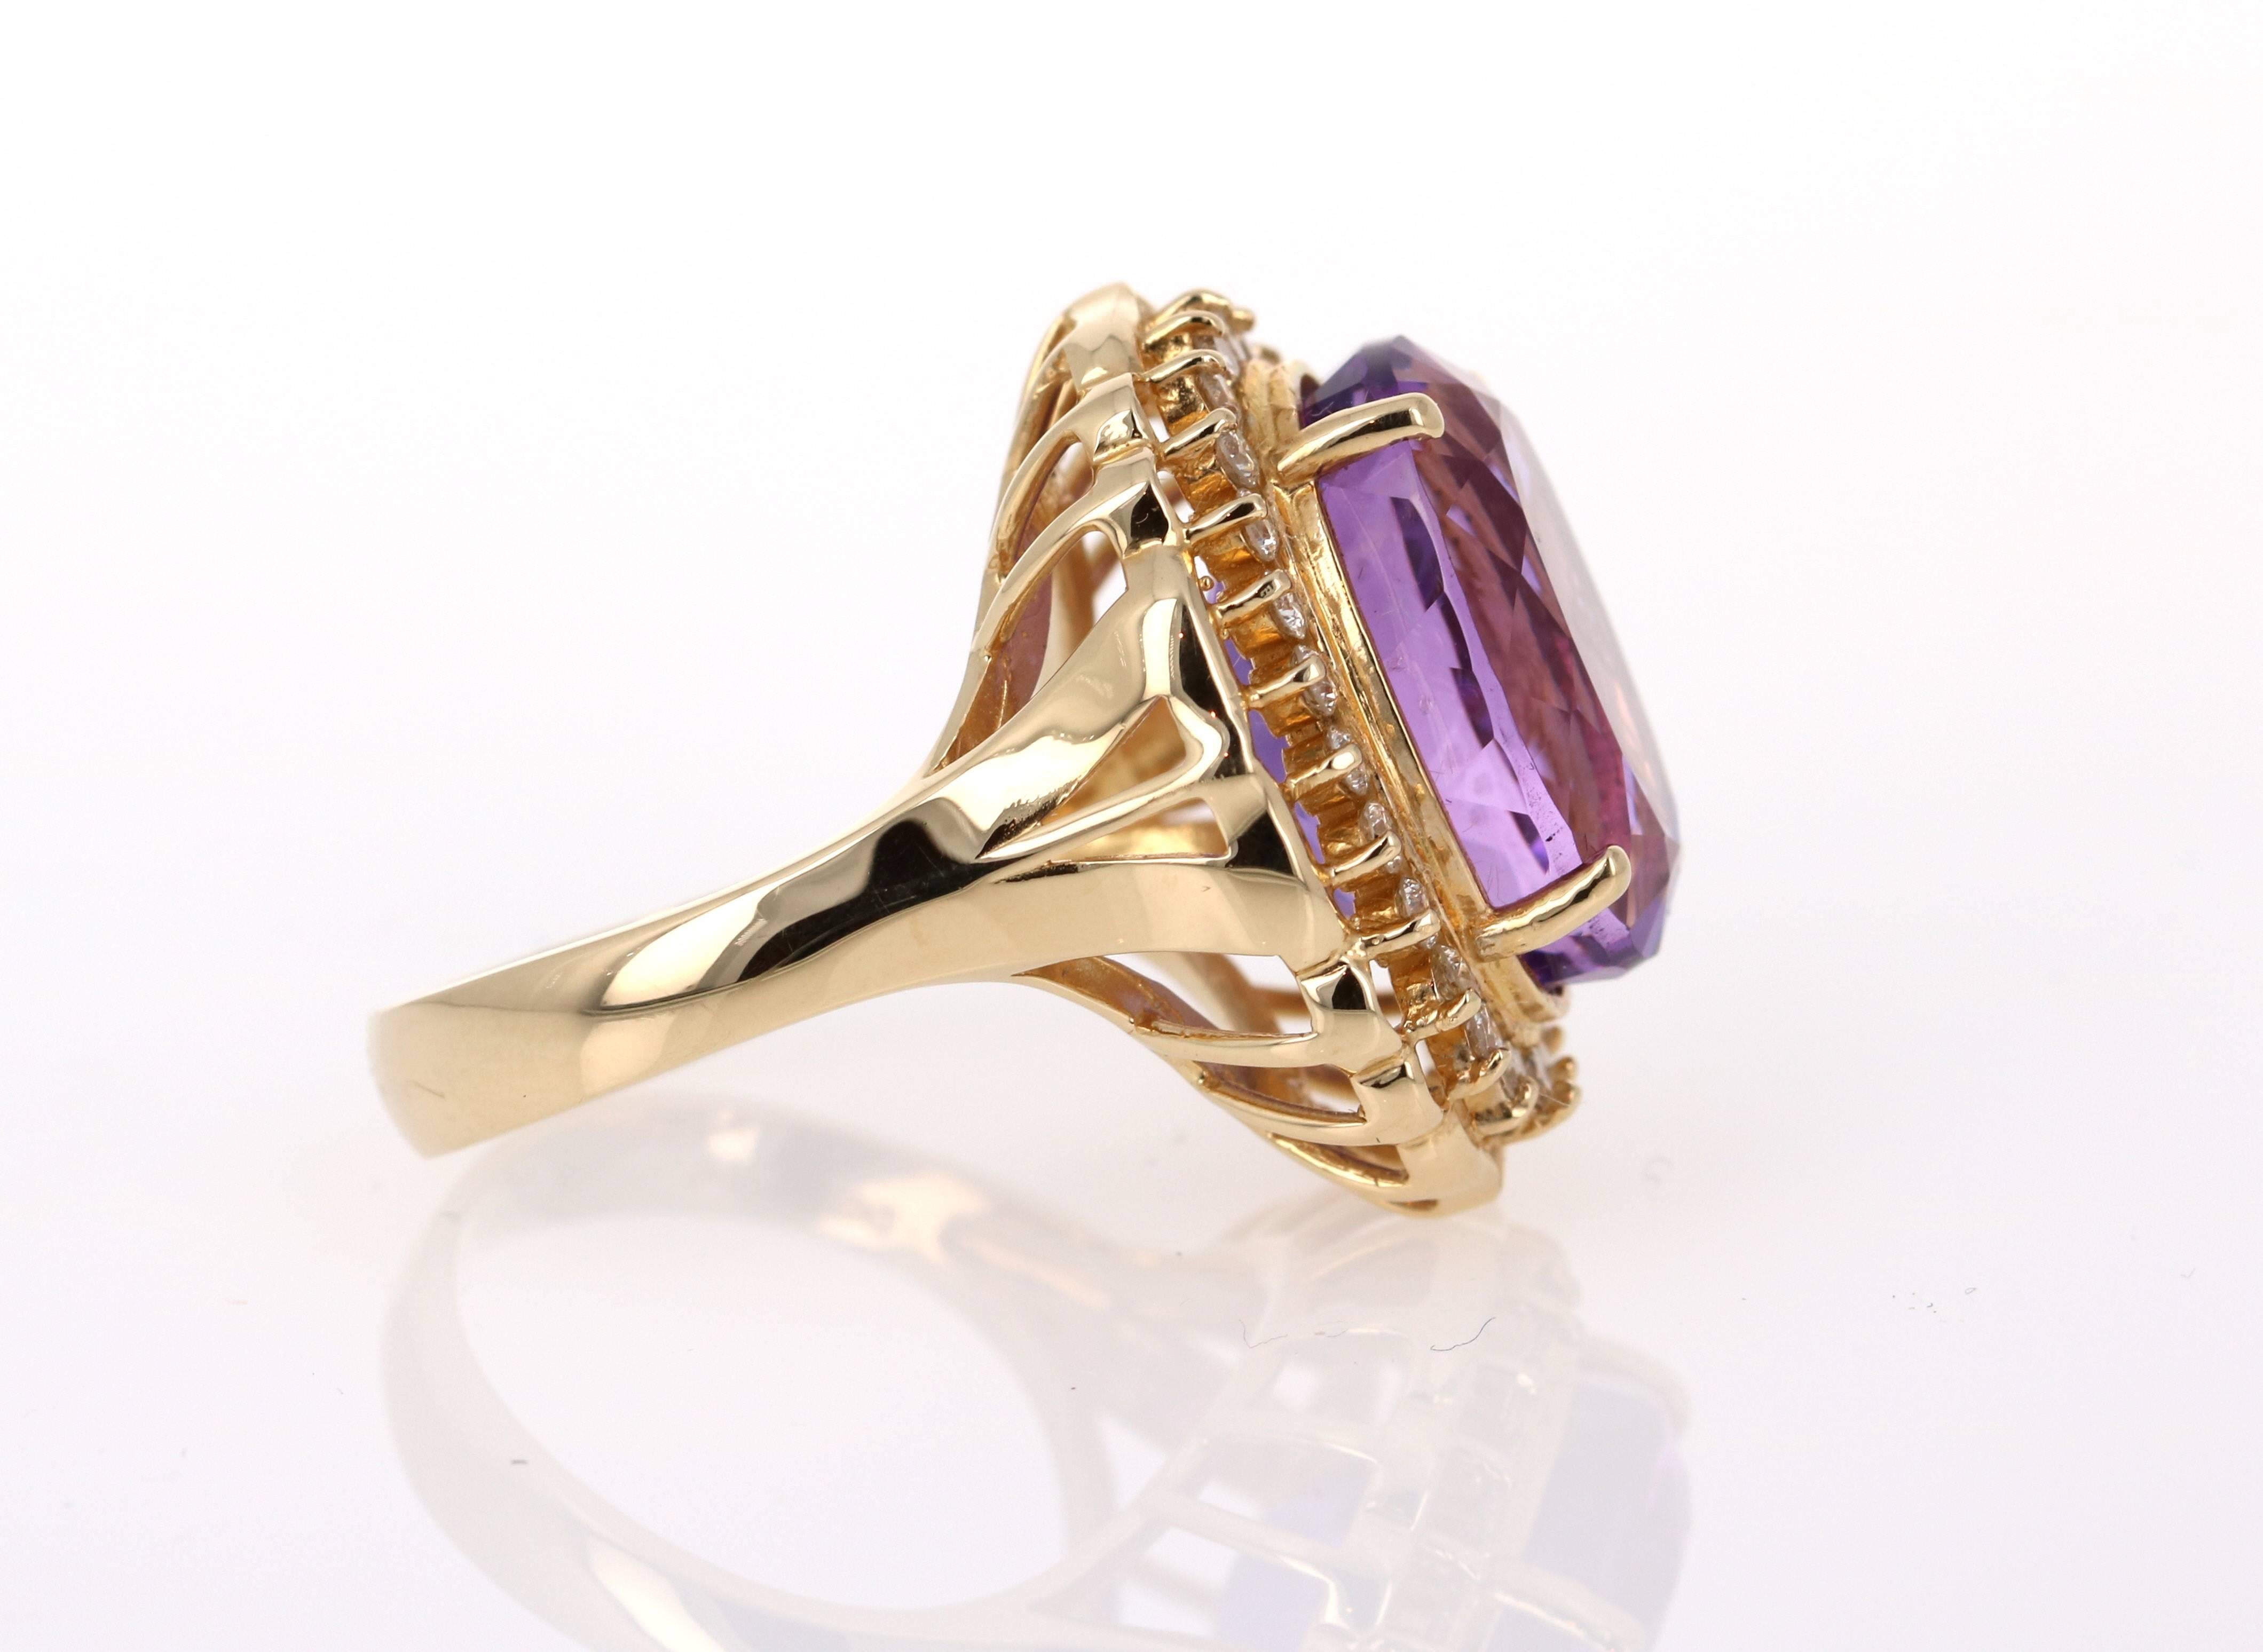 This gorgeous cocktail  ring has a huge Oval Cut Amethyst set in the center of the ring that weighs 11.79 carats. And it is surrounded by 26 Round Cut Diamonds that weigh 0.62 carats.  The clarity and color of the diamonds is: VS2 and H.  The total